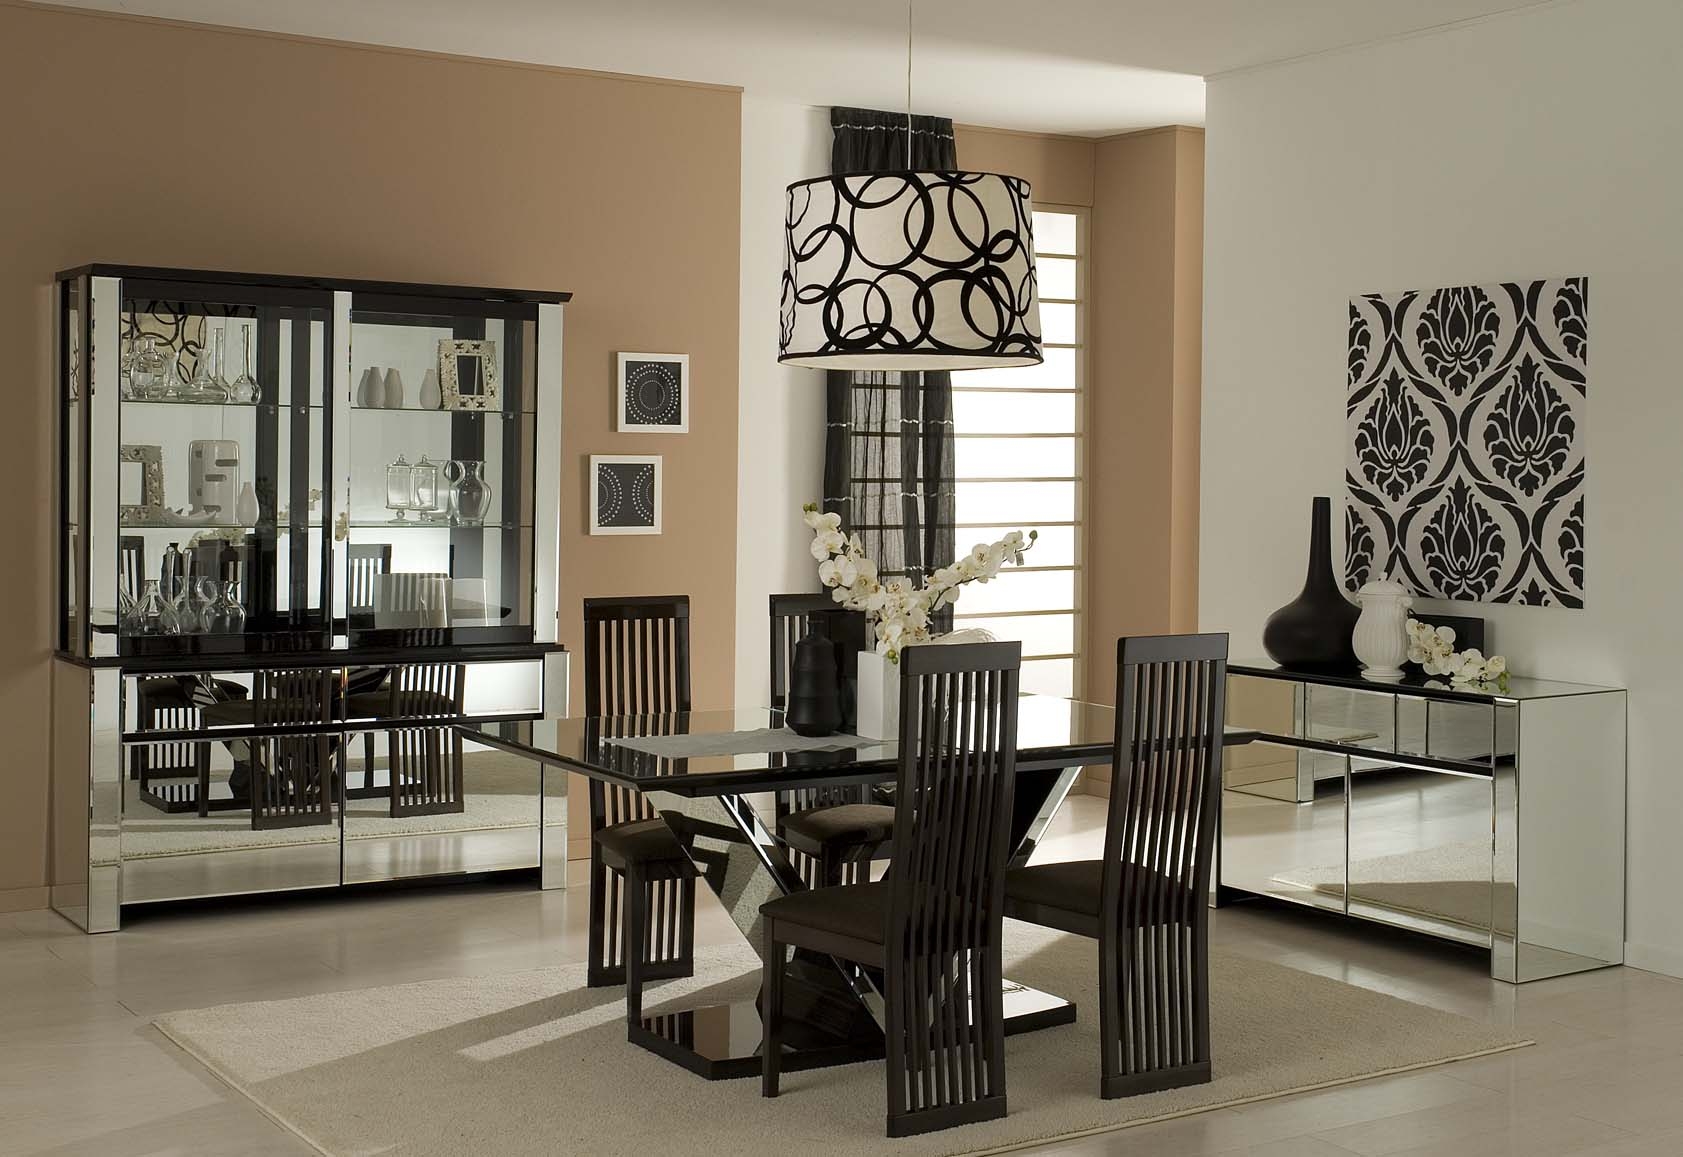 dining room decorating ideas pictures photo - 2